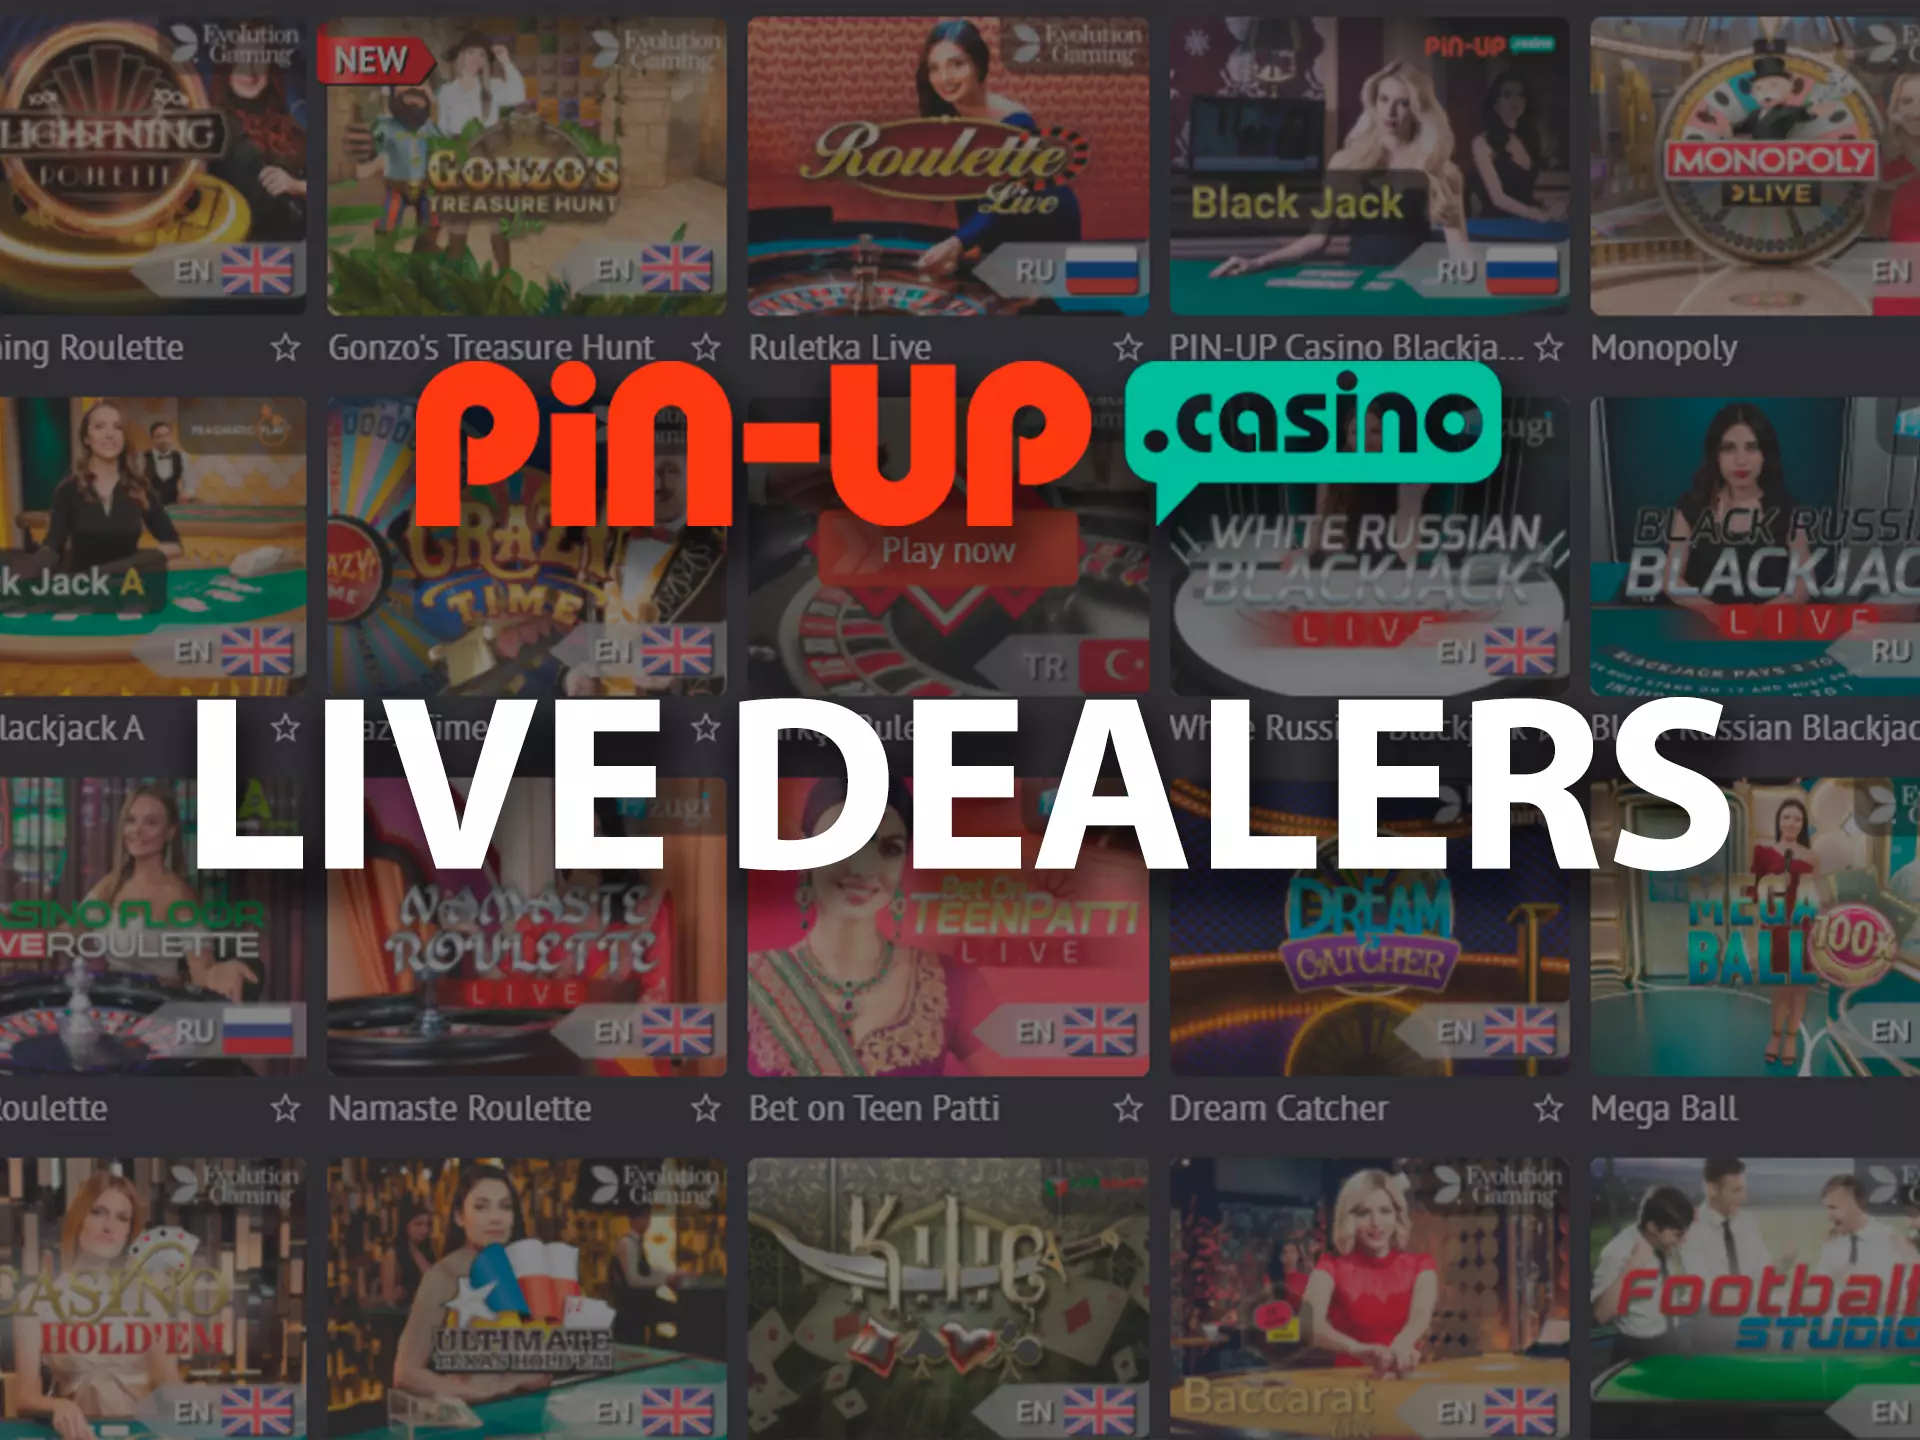 Experience the atmosphere of a real casino with the games with live dealers.